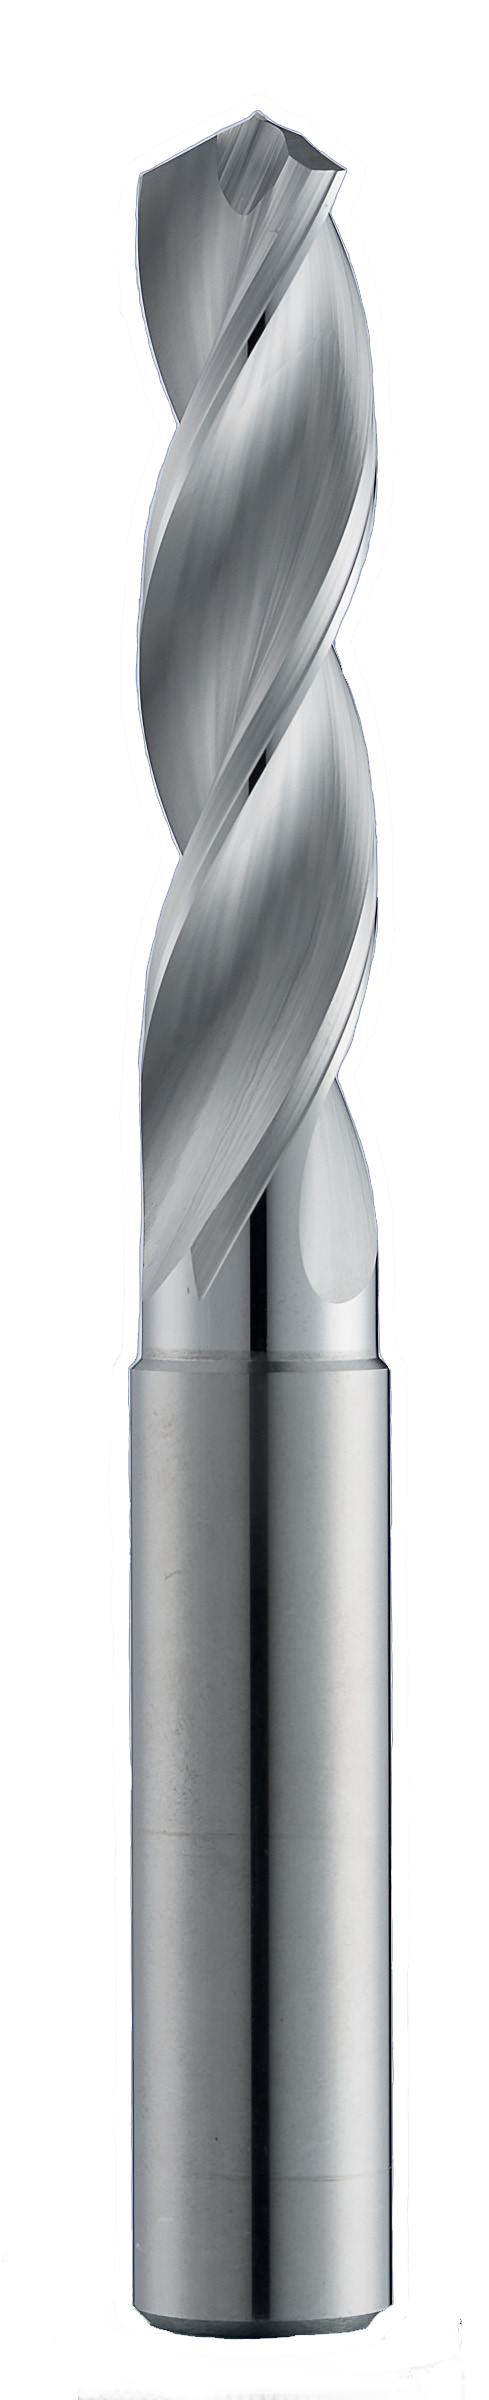 6.90mm Dia, 124 Degree Point, Solid Carbide Drill - 64639